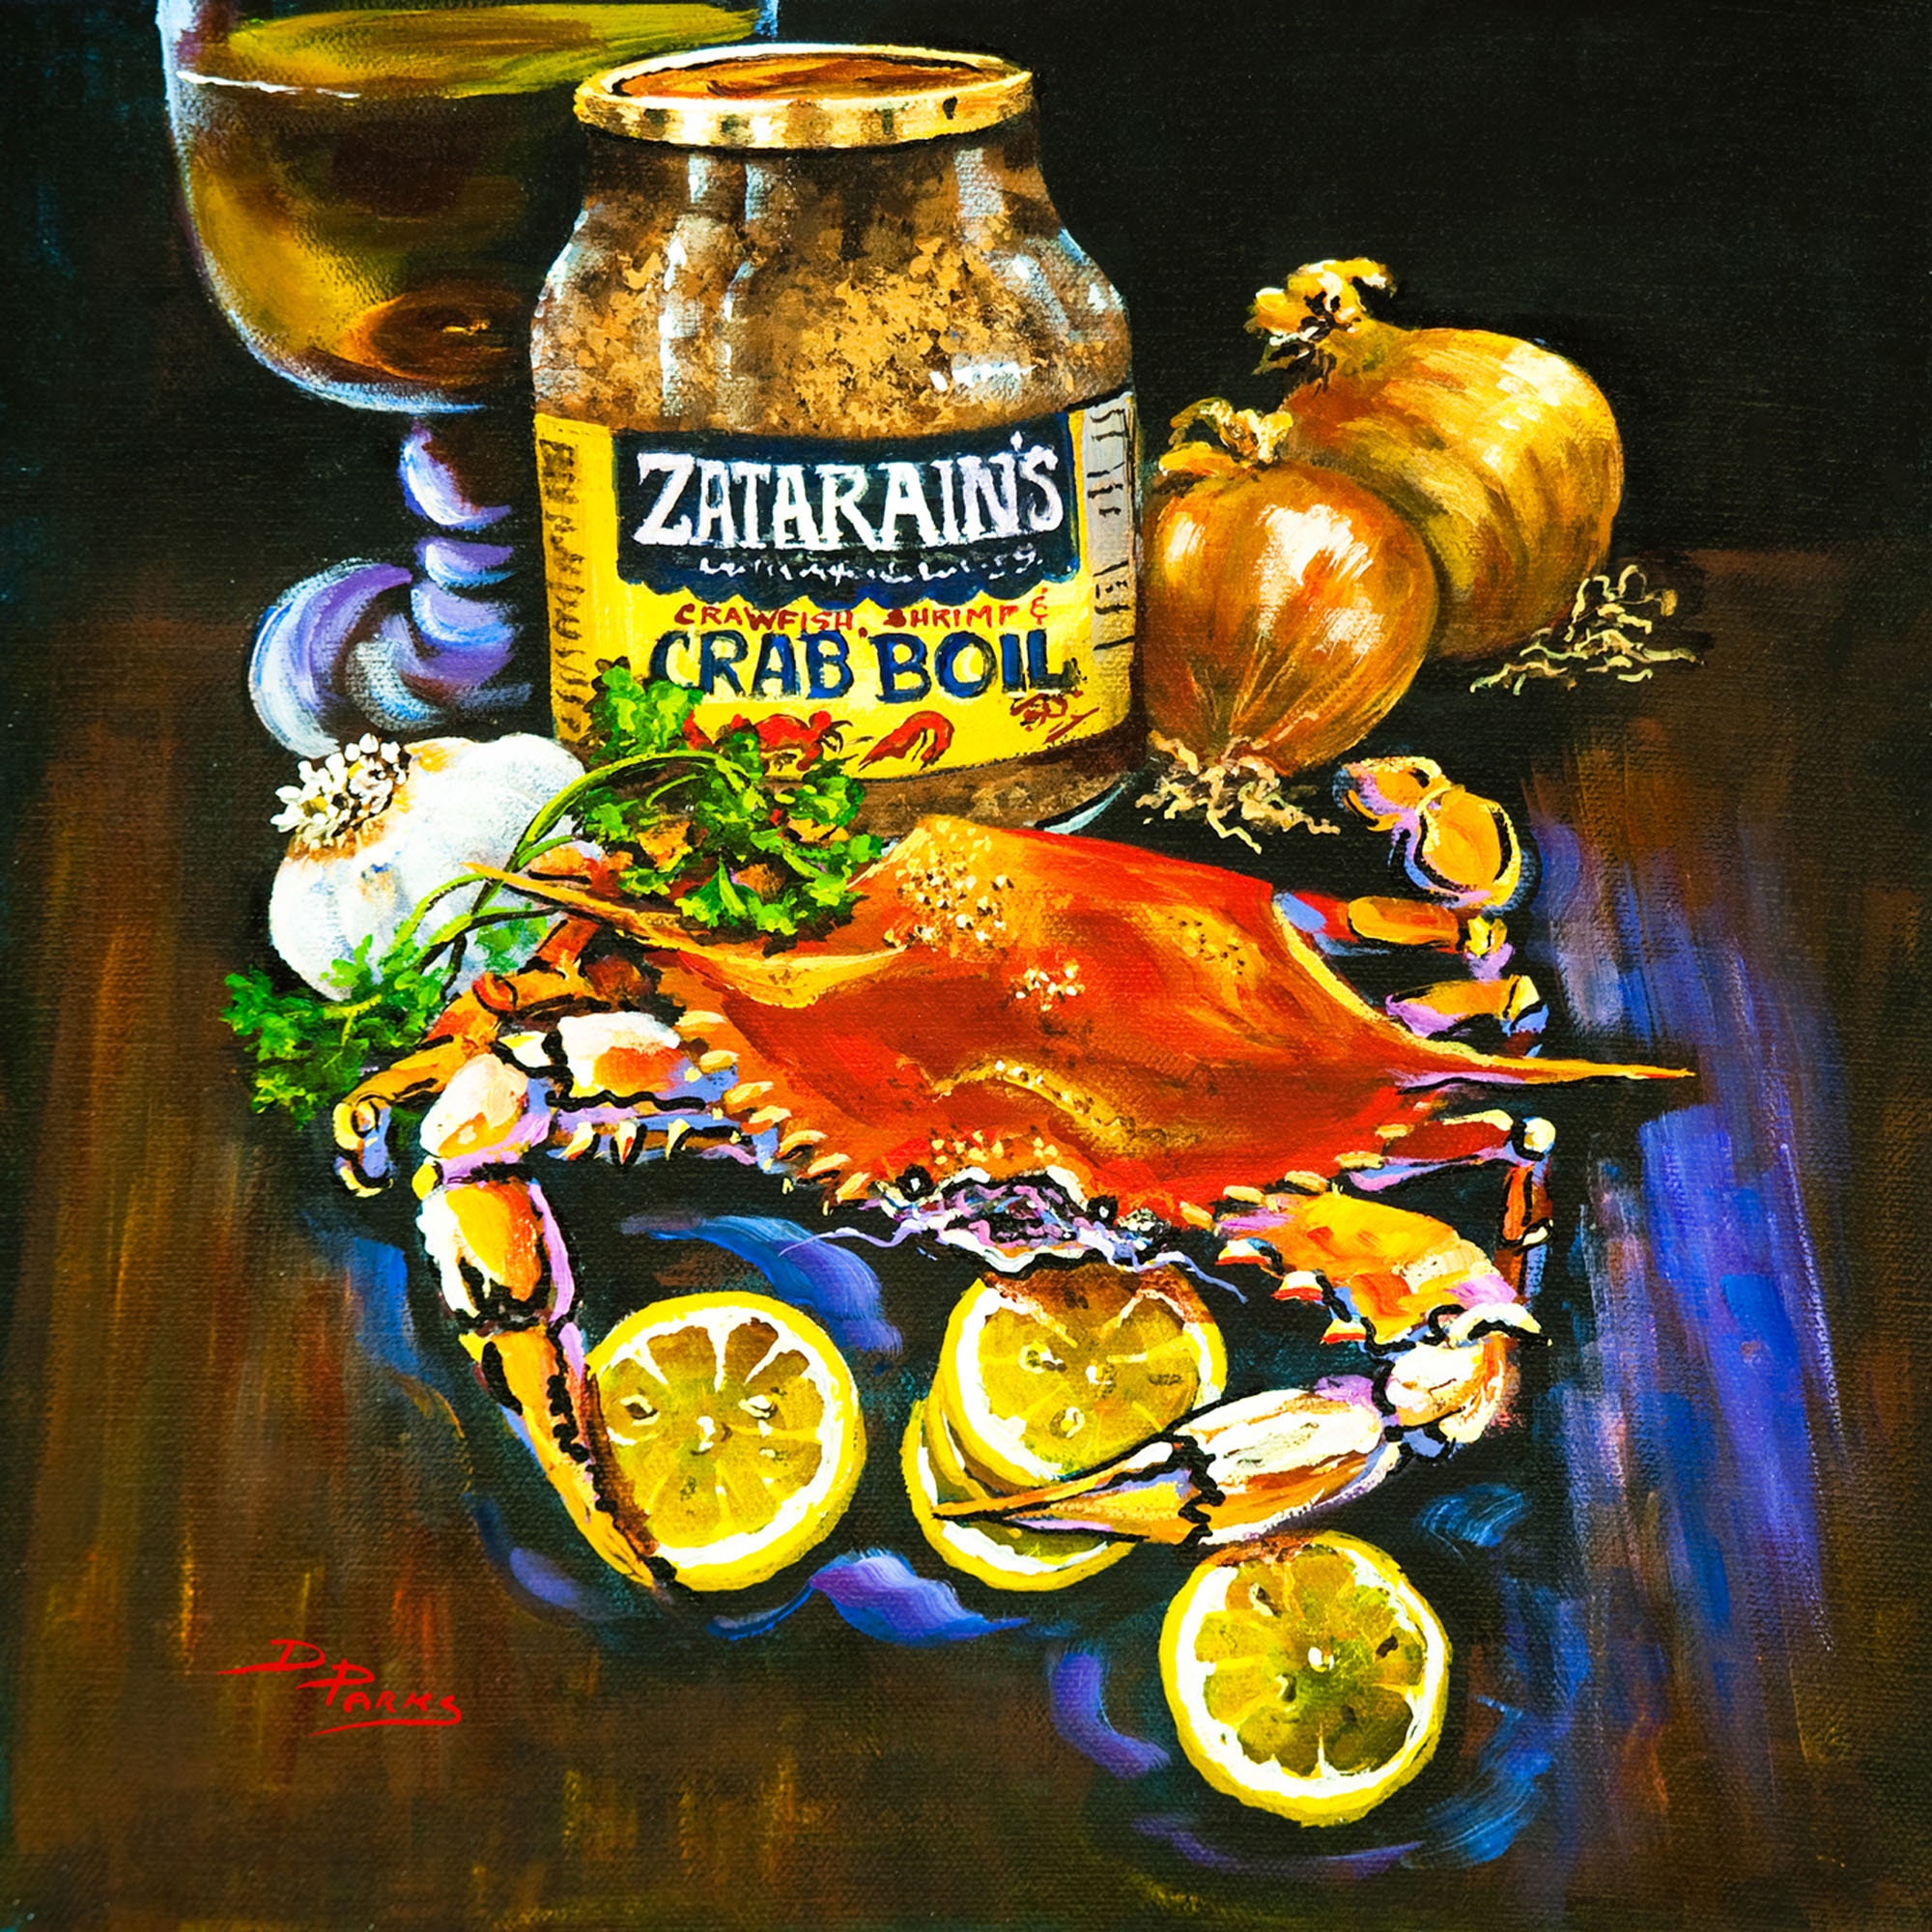 Boiled Crab Art Print, Zatarains, Fixins For A Boil, New Orleans Seafood Art, Hot Crabs, Art Kitchen Gift - "Crab Fixins'